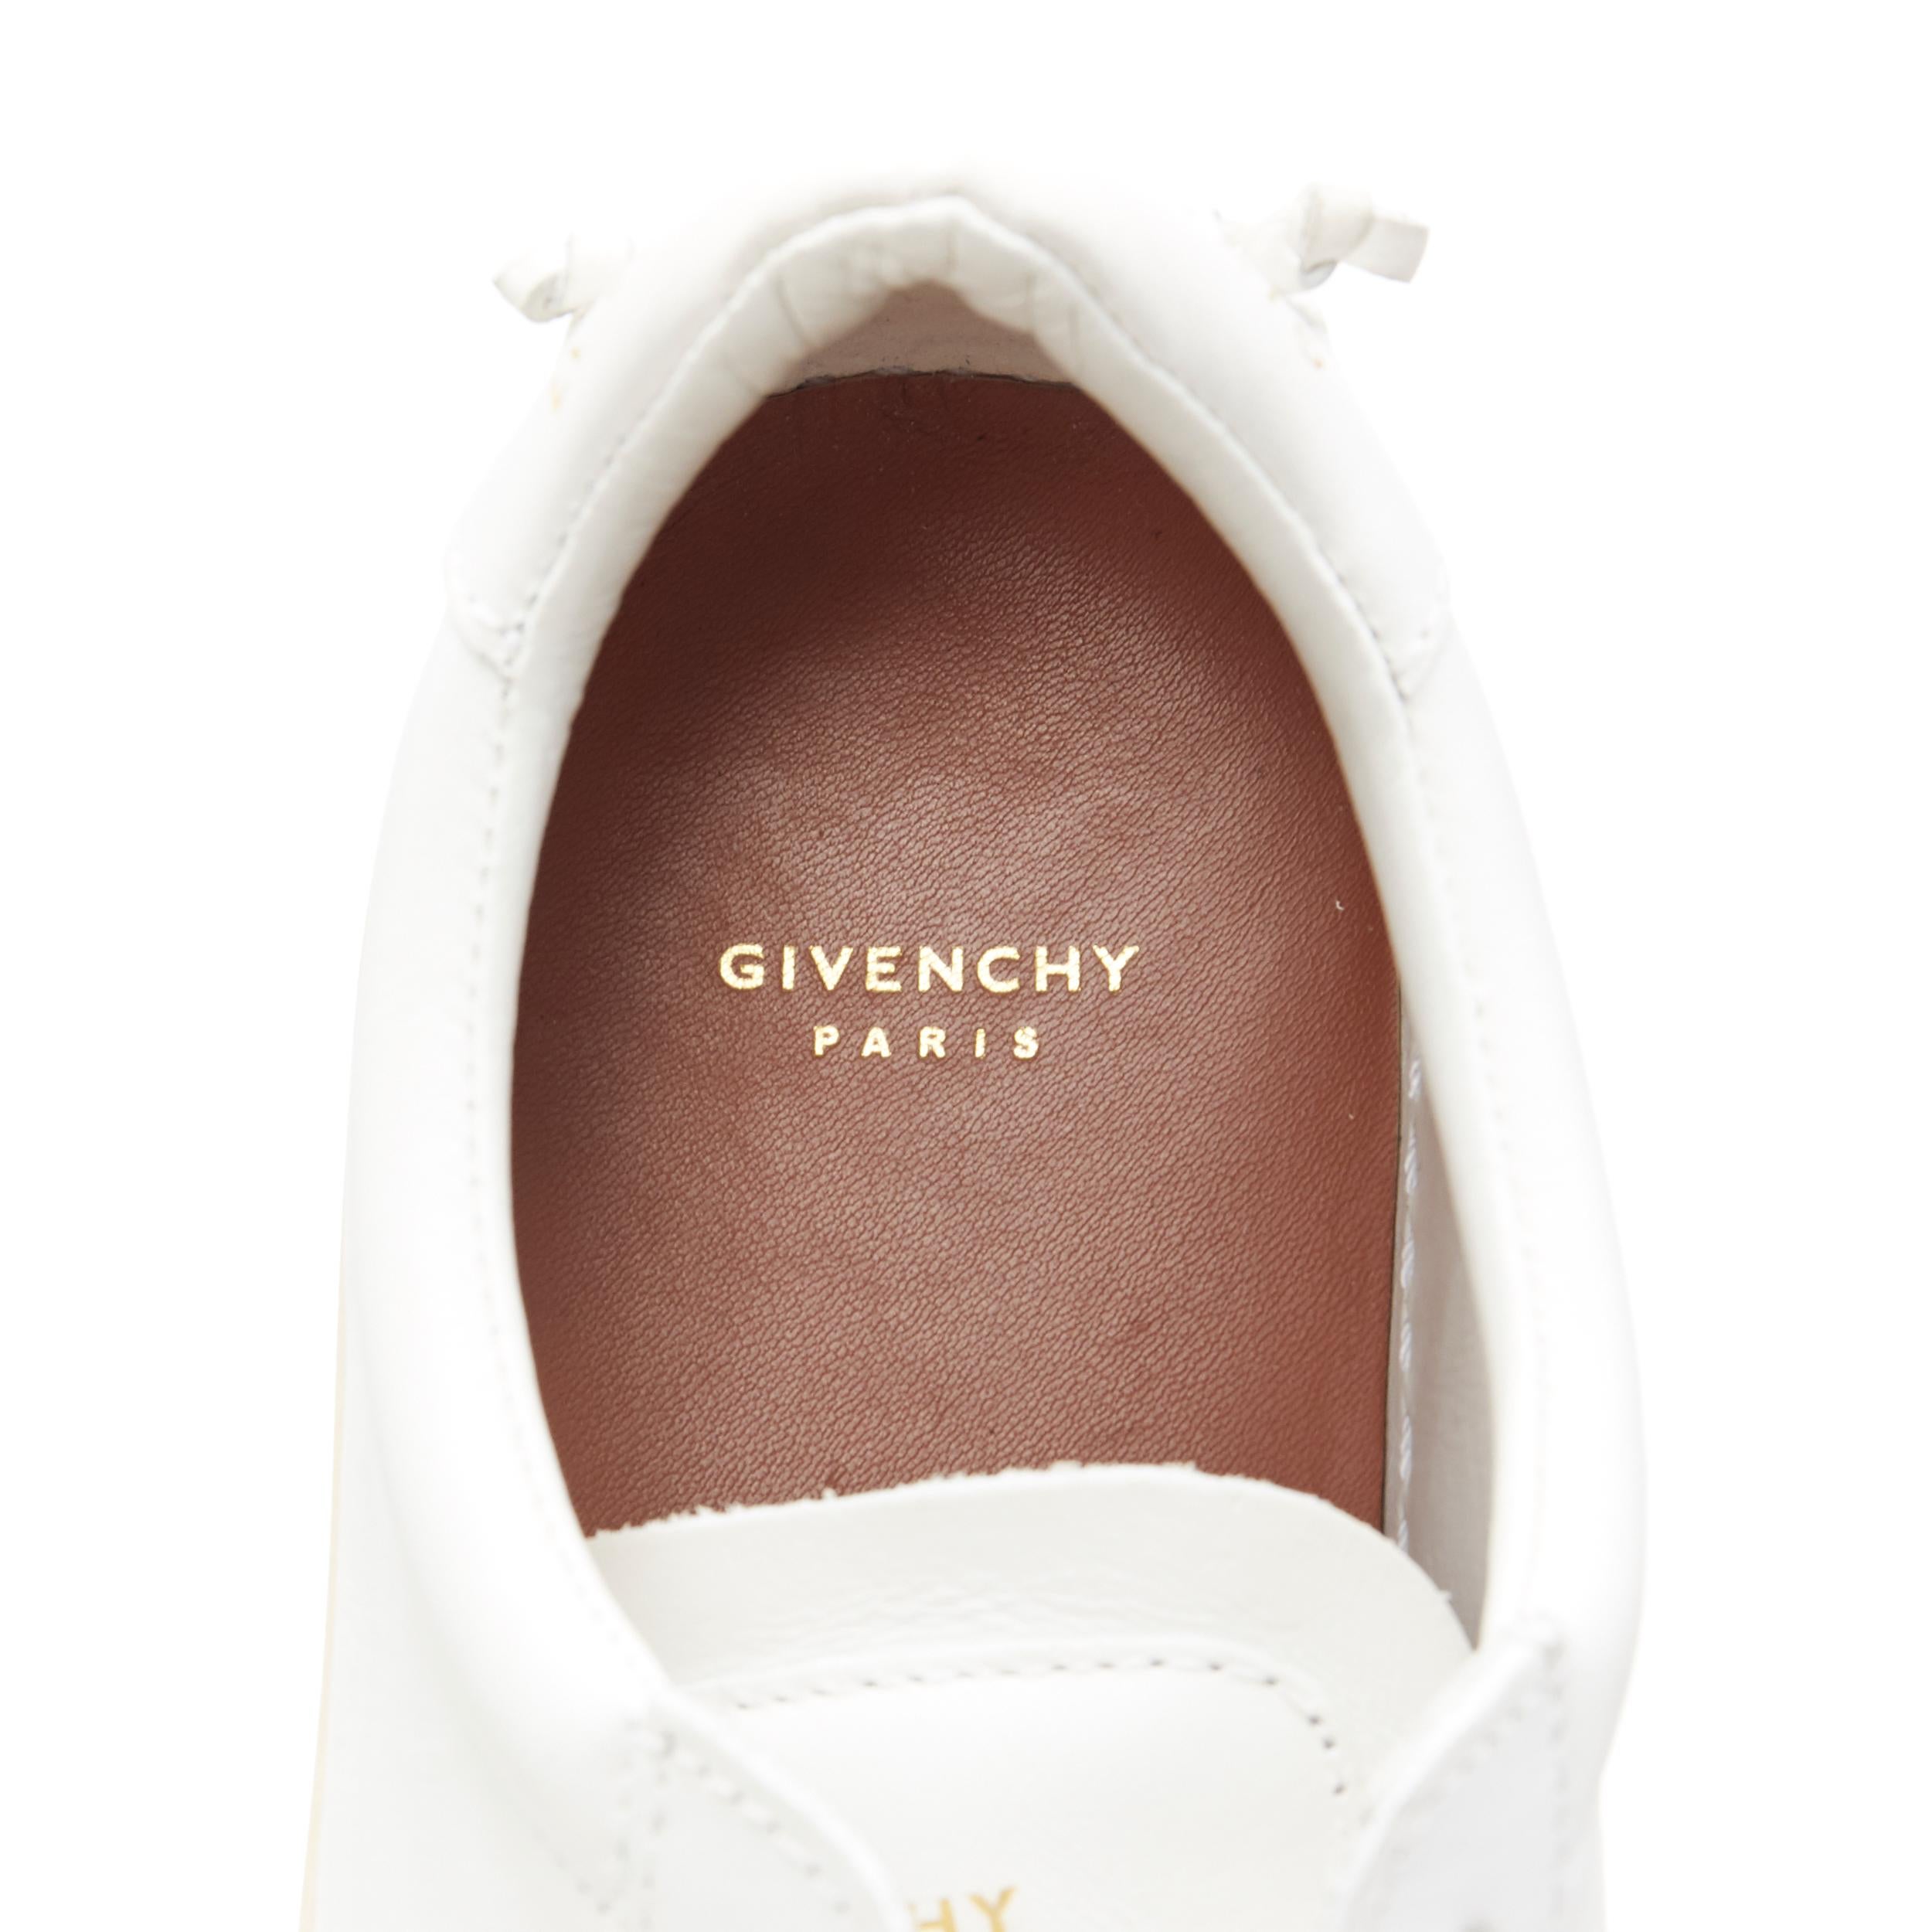 GIVENCHY Paris 17 white leather lace up minimalist low top sneakers EU37.5 3